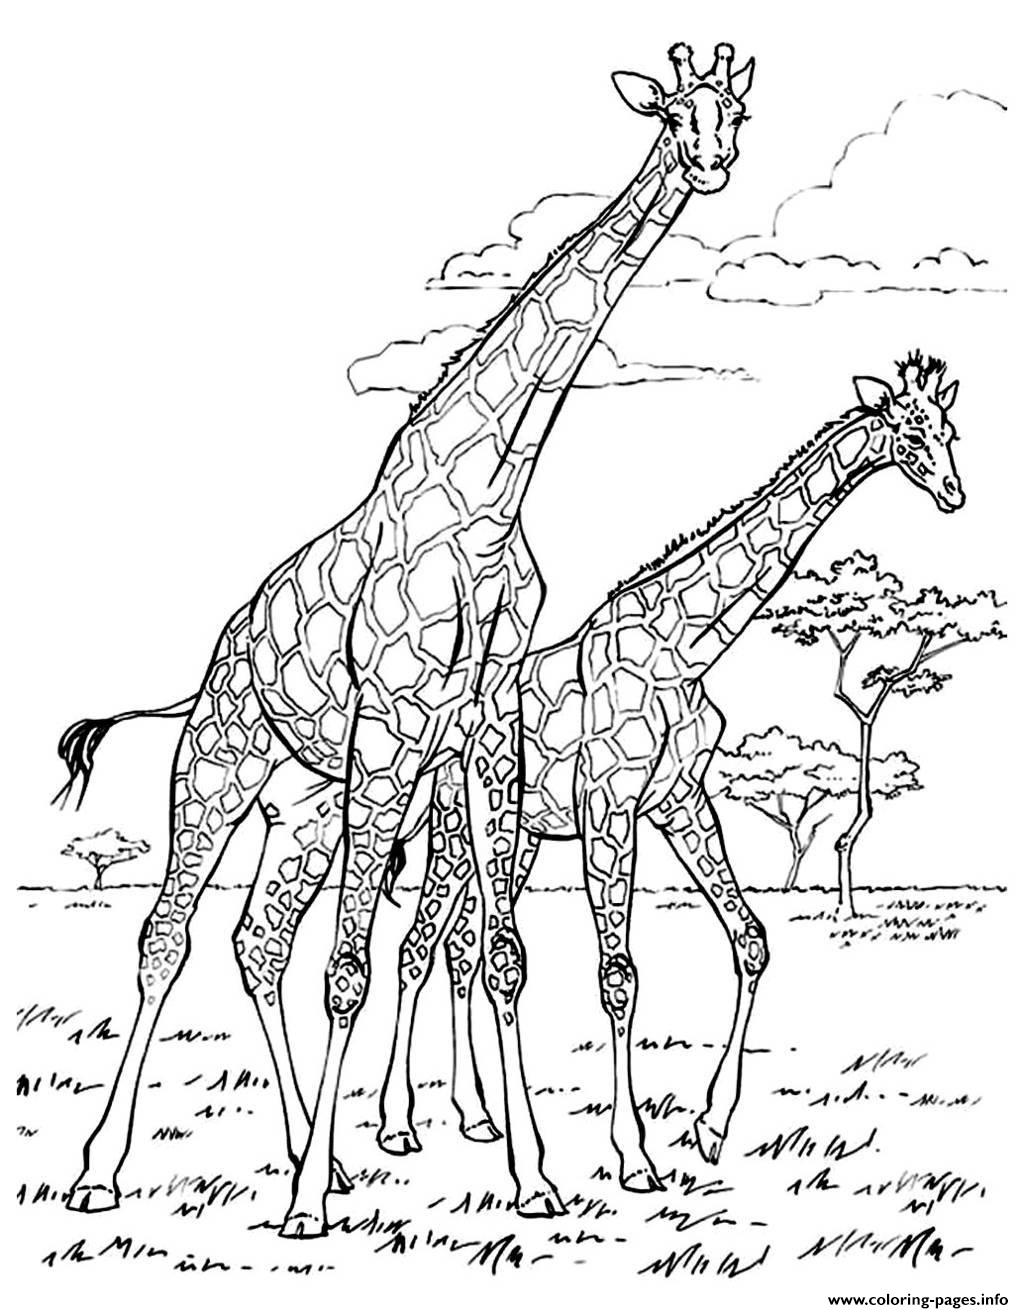 Africa Giraffes Coloring Page   Free Printable Coloring Pages for Kids